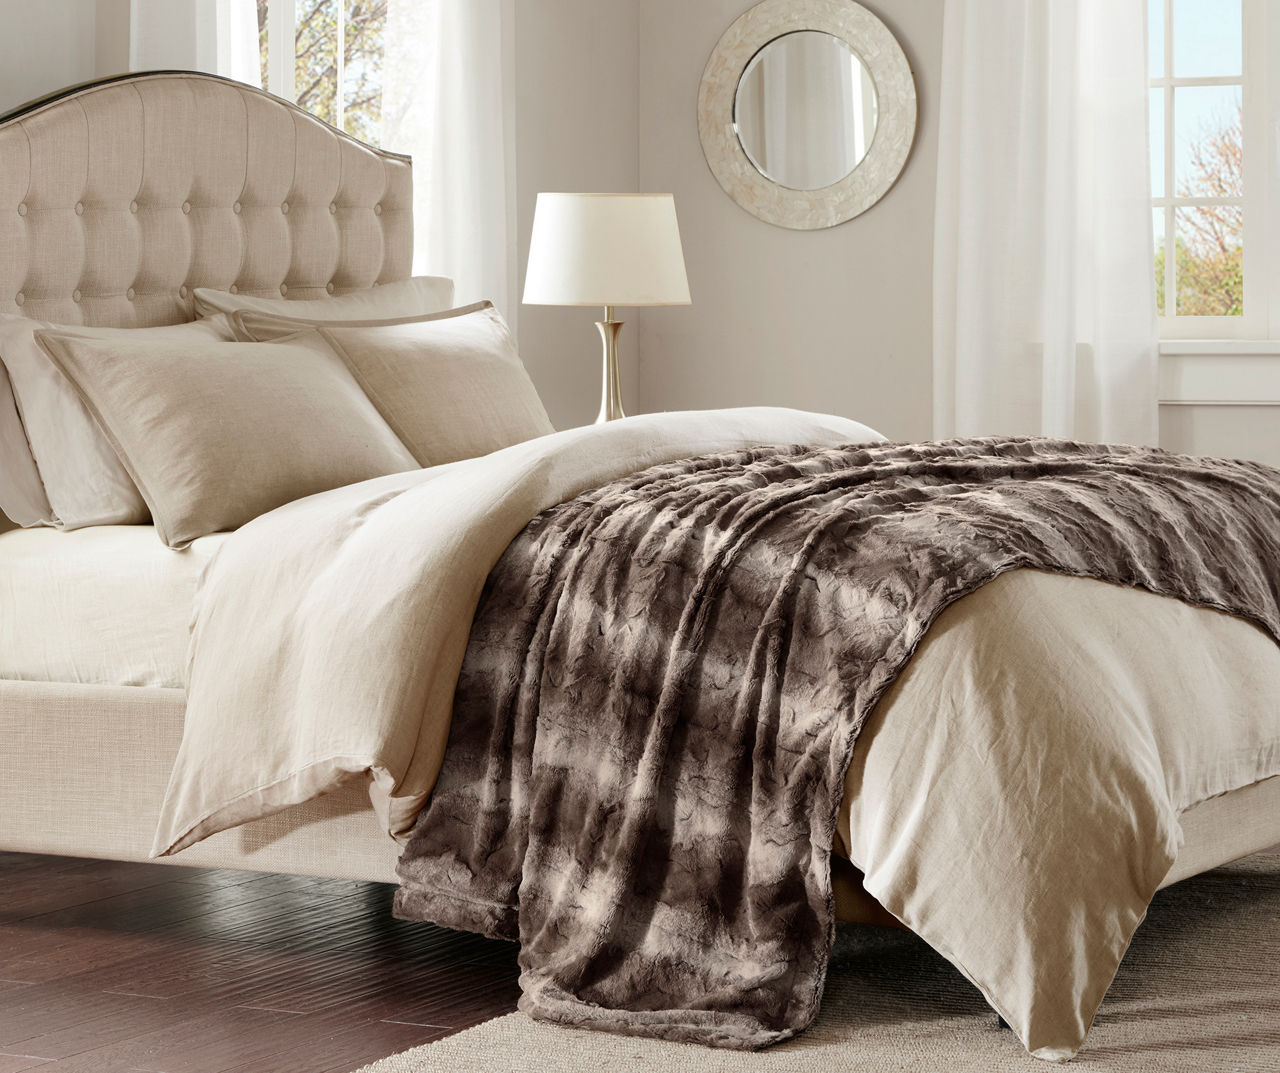 Marselle Brown Stripe Faux Fur Bed Throw, (80" x 96")